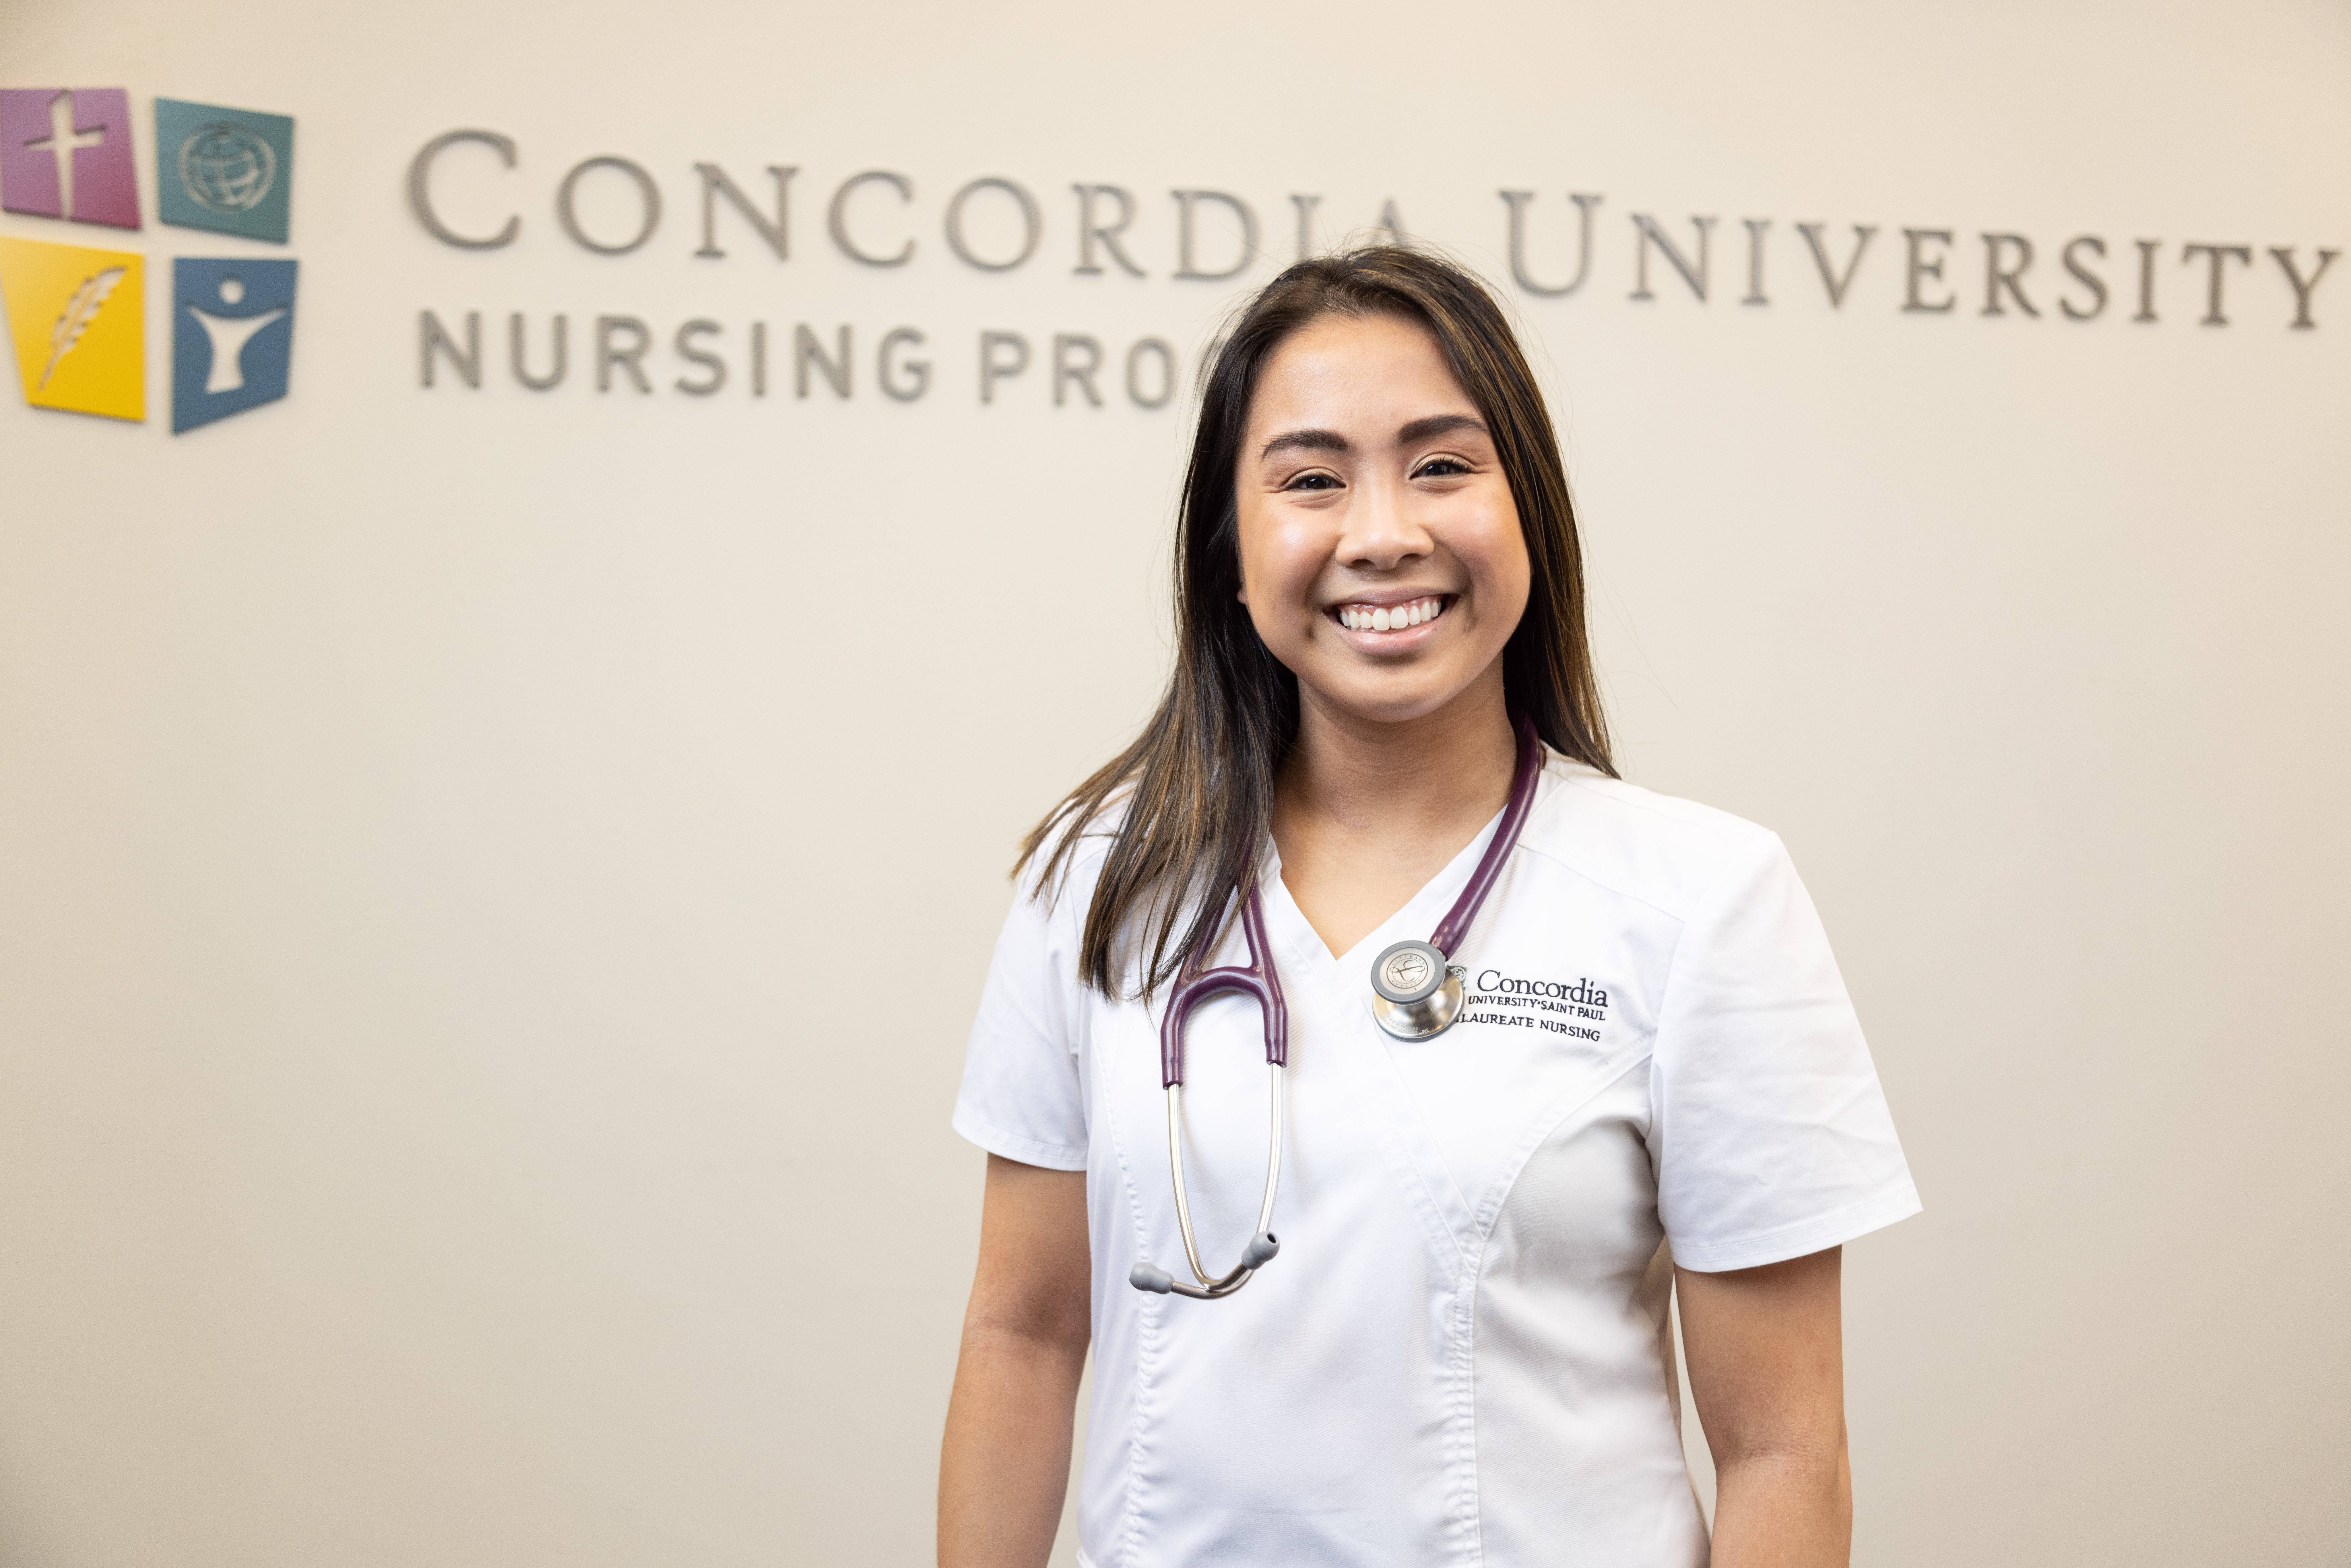 Smiling nursing student wearing white scrubs and a purple stethoscope standing in front of a tan wall that has a Concordia University Nursing Program logo on it.